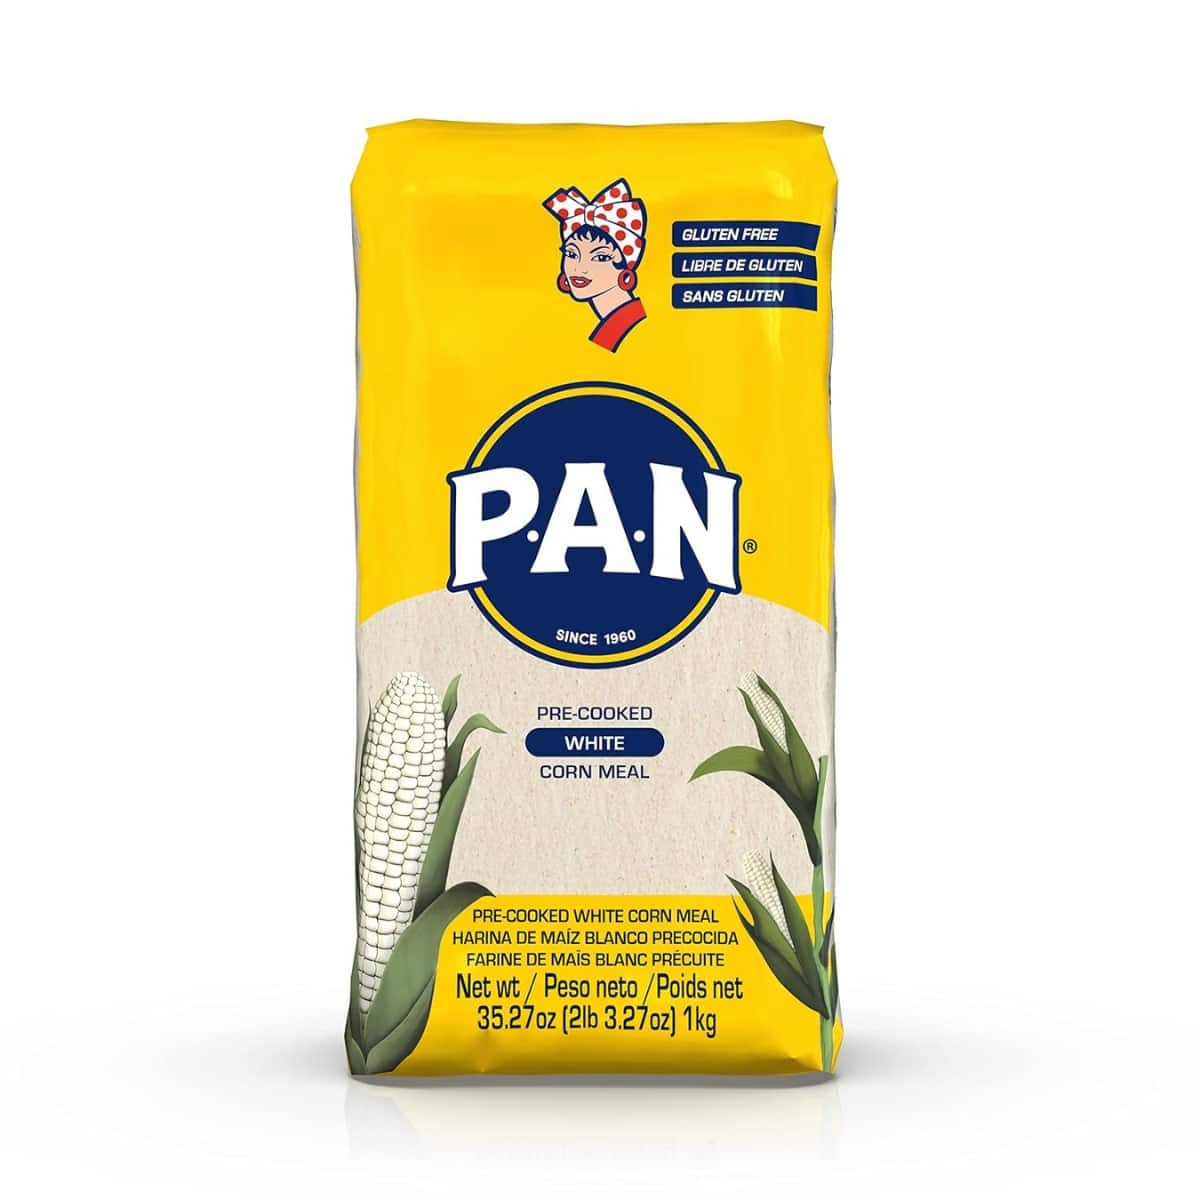 Buy PAN White Corn Meal (Pre-Cooked) - 1 kg